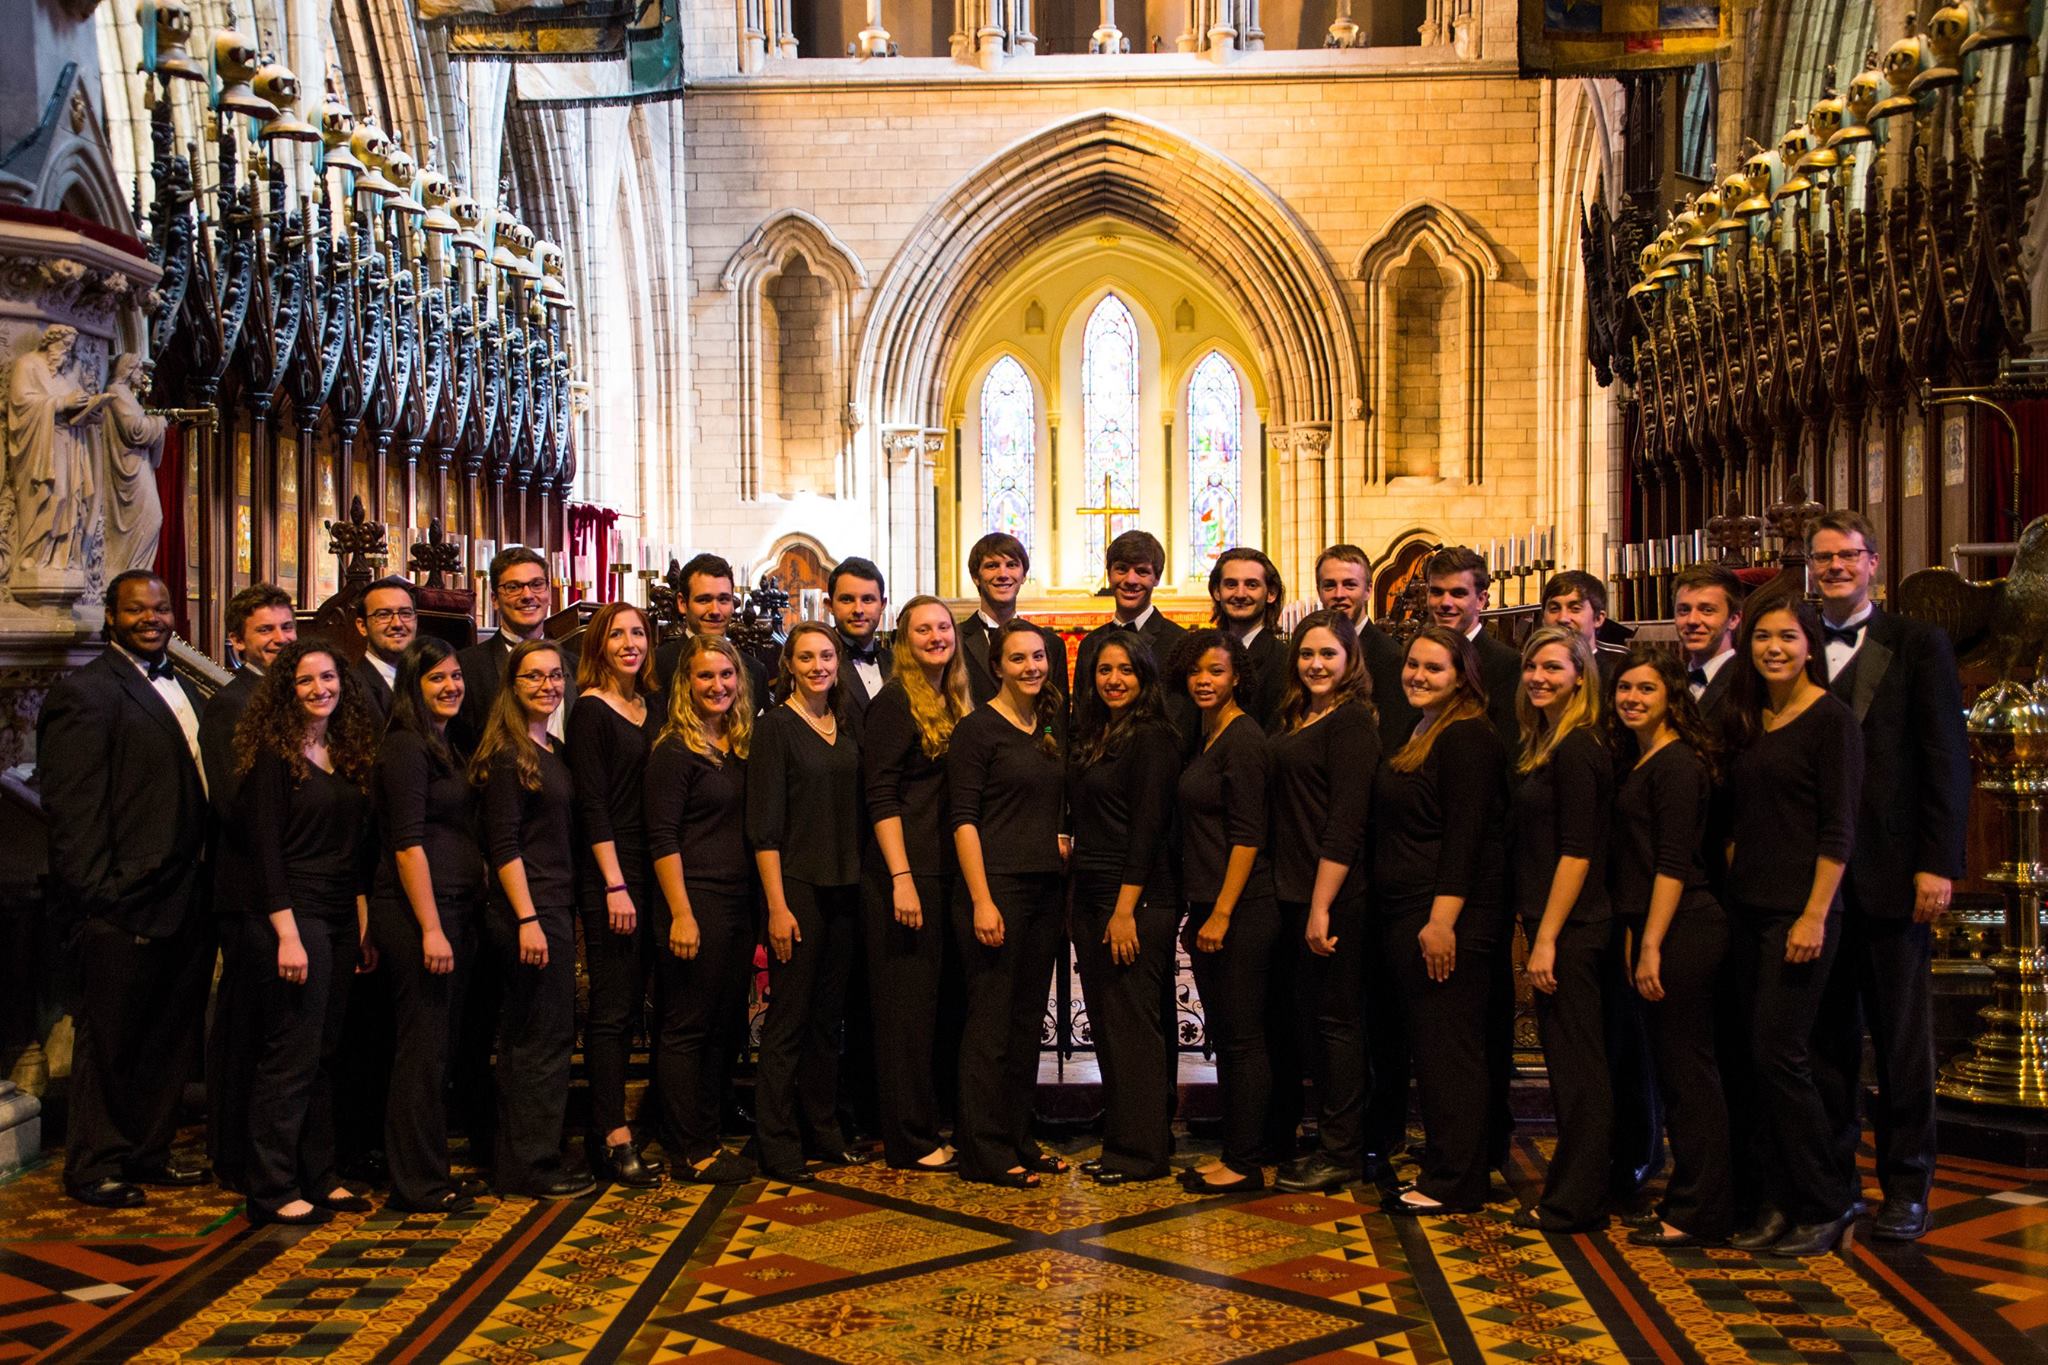 Choir students posing for a picture in St. Patrick’s Cathedral, Dublin, Ireland